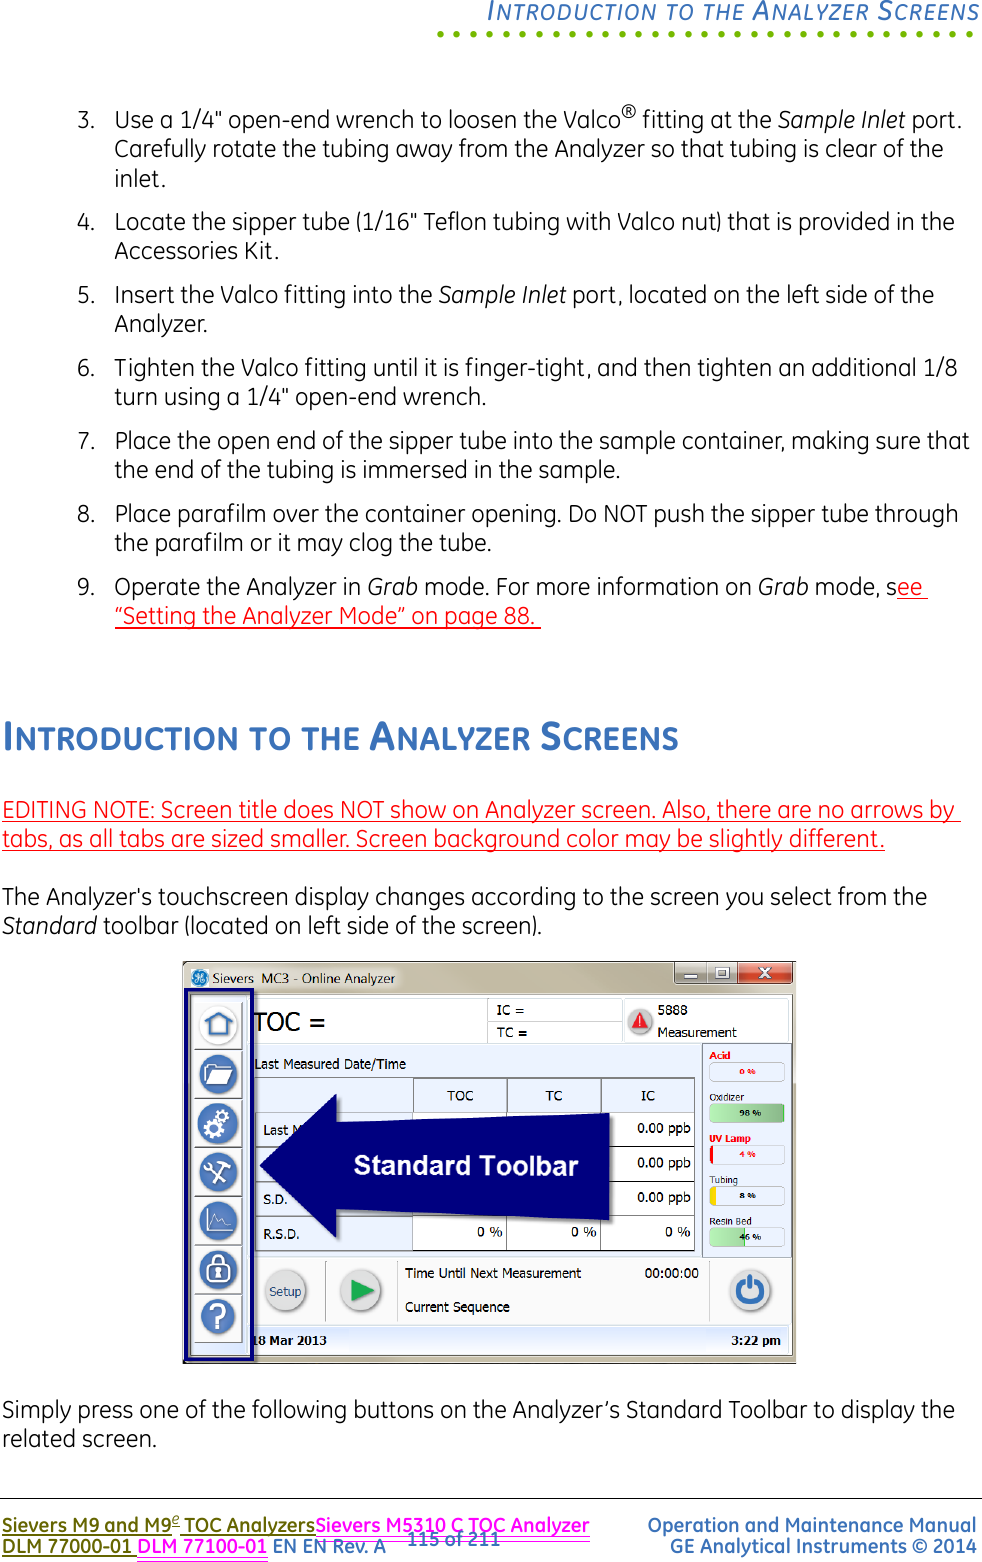 .................................INTRODUCTION TO THE ANALYZER SCREENSSievers M9 and M9e TOC AnalyzersSievers M5310 C TOC Analyzer Operation and Maintenance ManualDLM 77000-01 DLM 77100-01 EN EN Rev. A GE Analytical Instruments © 2014115 of 2113. Use a 1/4&quot; open-end wrench to loosen the Valco® fitting at the Sample Inlet port. Carefully rotate the tubing away from the Analyzer so that tubing is clear of the inlet. 4. Locate the sipper tube (1/16&quot; Teflon tubing with Valco nut) that is provided in the Accessories Kit.5. Insert the Valco fitting into the Sample Inlet port, located on the left side of the Analyzer.6. Tighten the Valco fitting until it is finger-tight, and then tighten an additional 1/8 turn using a 1/4&quot; open-end wrench.7. Place the open end of the sipper tube into the sample container, making sure that the end of the tubing is immersed in the sample. 8. Place parafilm over the container opening. Do NOT push the sipper tube through the parafilm or it may clog the tube.9. Operate the Analyzer in Grab mode. For more information on Grab mode, see “Setting the Analyzer Mode” on page 88. INTRODUCTION TO THE ANALYZER SCREENSEDITING NOTE: Screen title does NOT show on Analyzer screen. Also, there are no arrows by tabs, as all tabs are sized smaller. Screen background color may be slightly different.The Analyzer&apos;s touchscreen display changes according to the screen you select from the Standard toolbar (located on left side of the screen). Simply press one of the following buttons on the Analyzer’s Standard Toolbar to display the related screen.